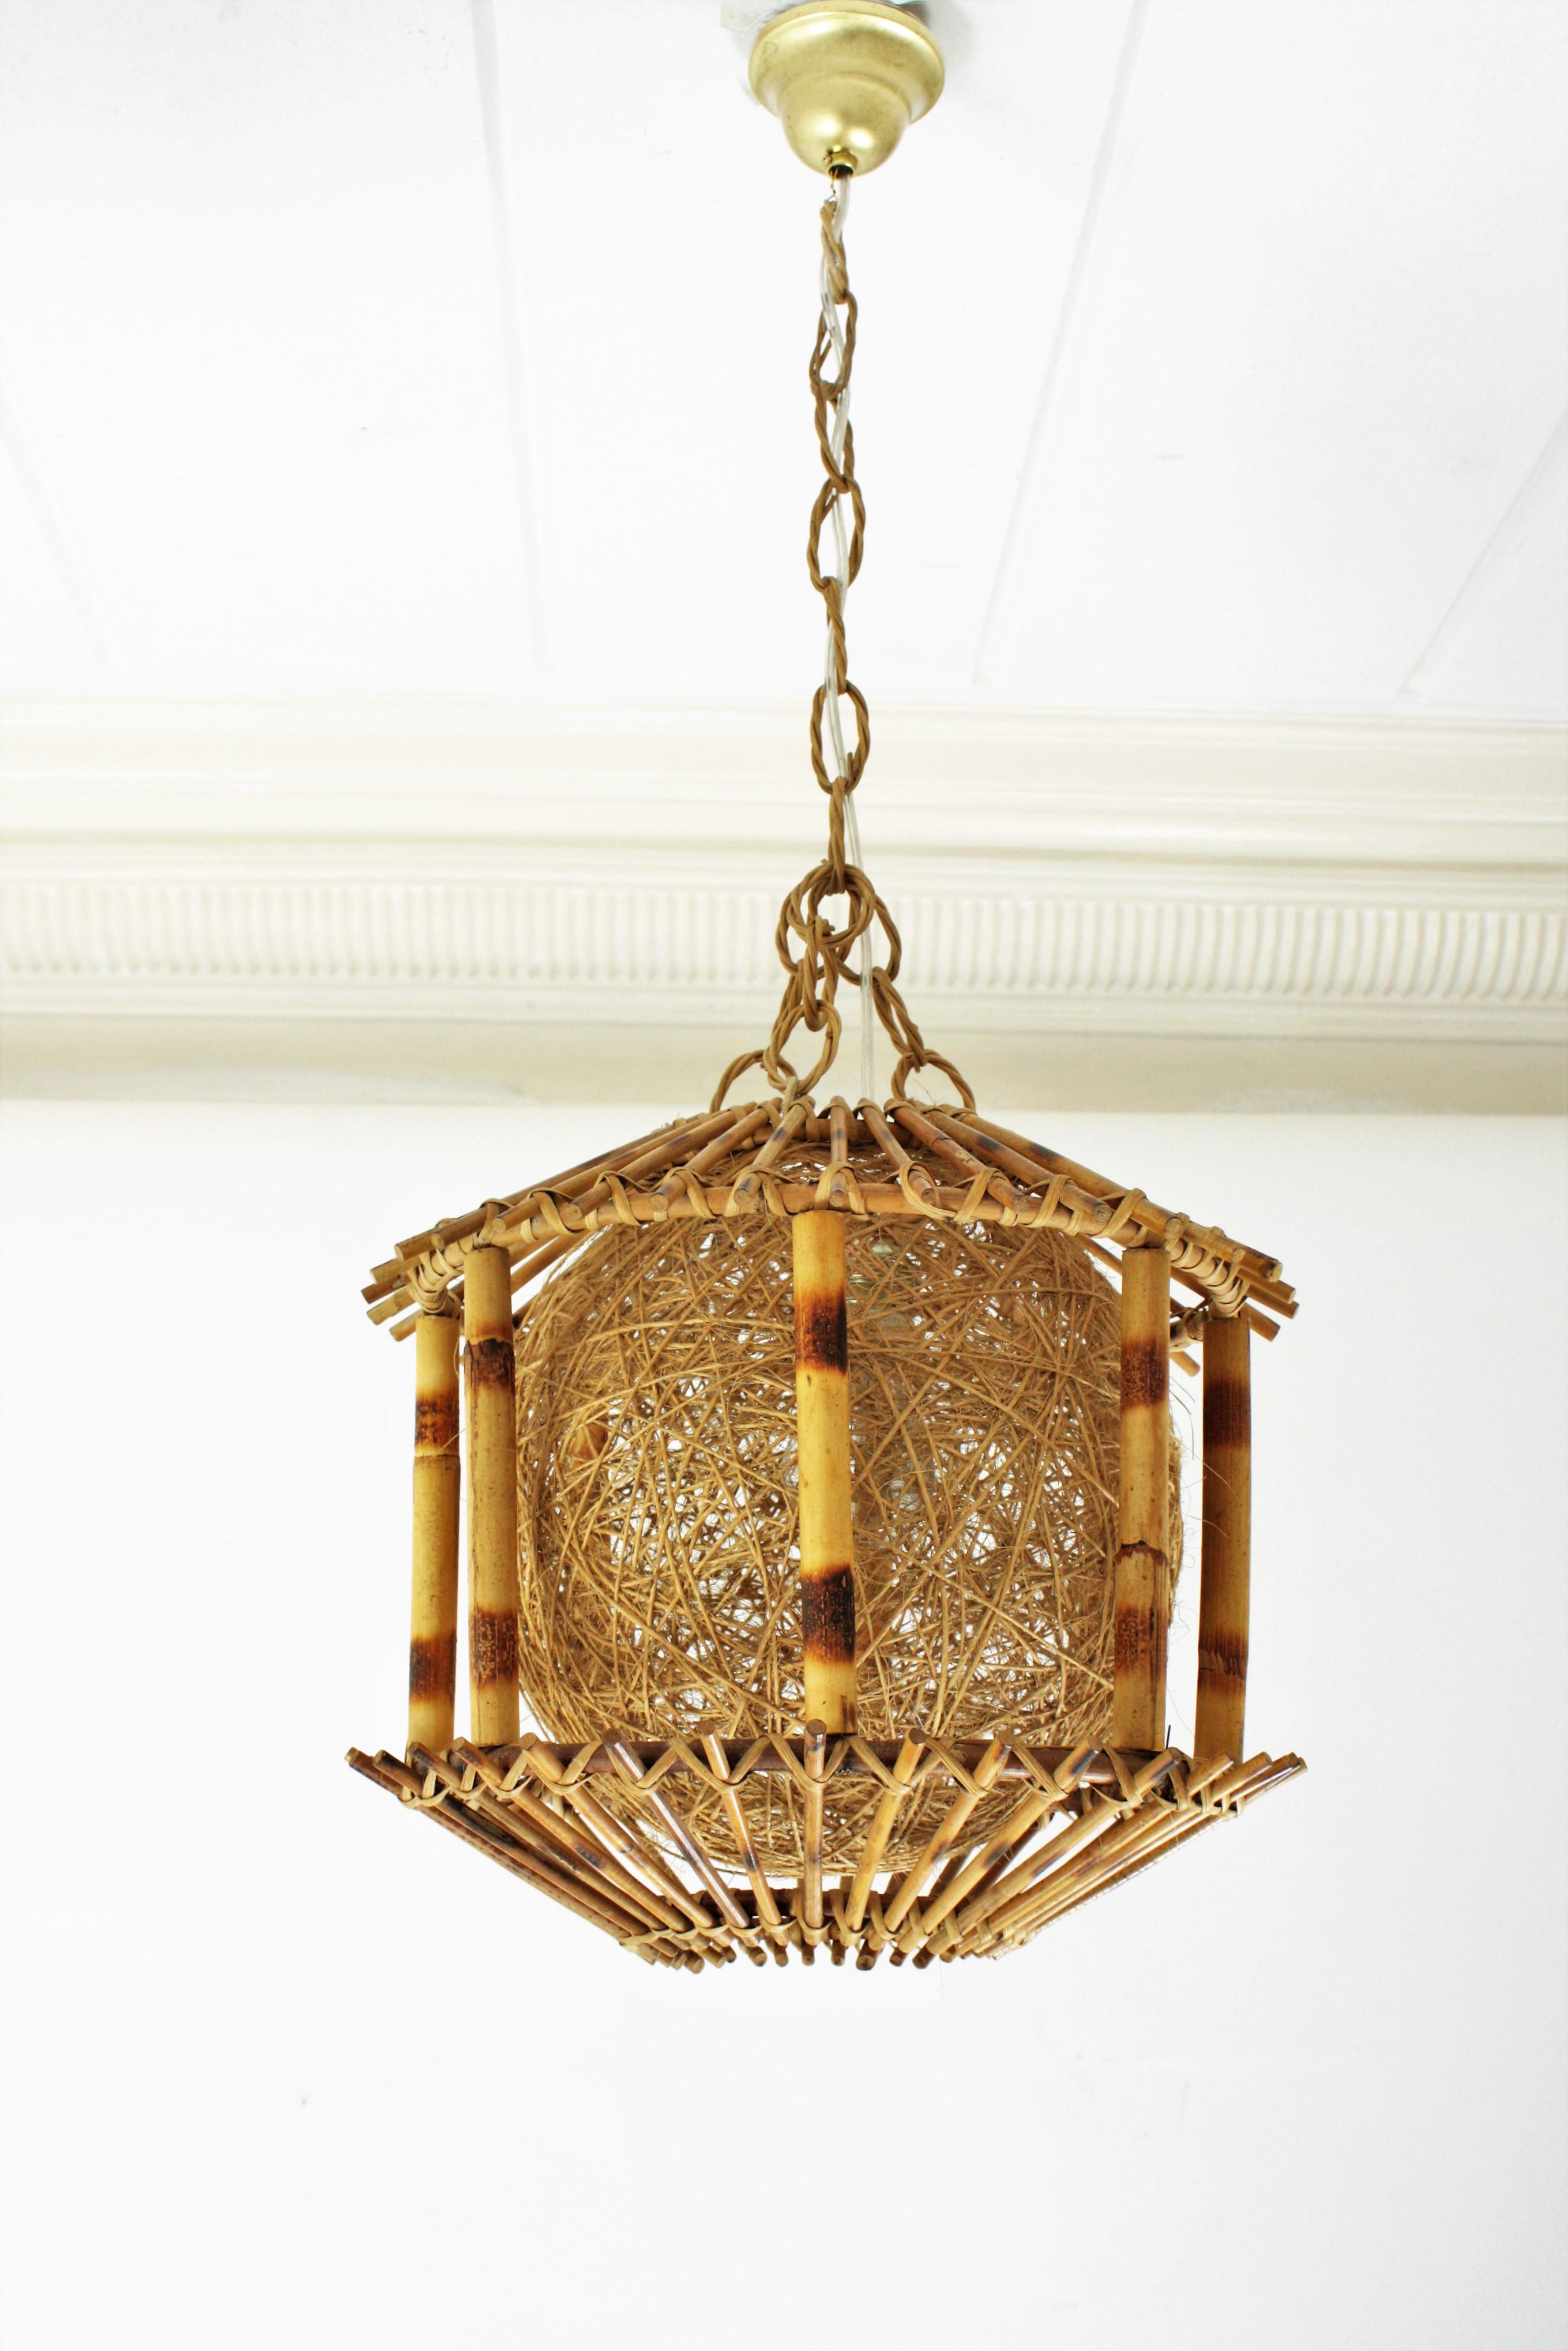 Rattan and Bamboo Pendant Hanging Lamp / Lantern with Chinoiserie Accents 2